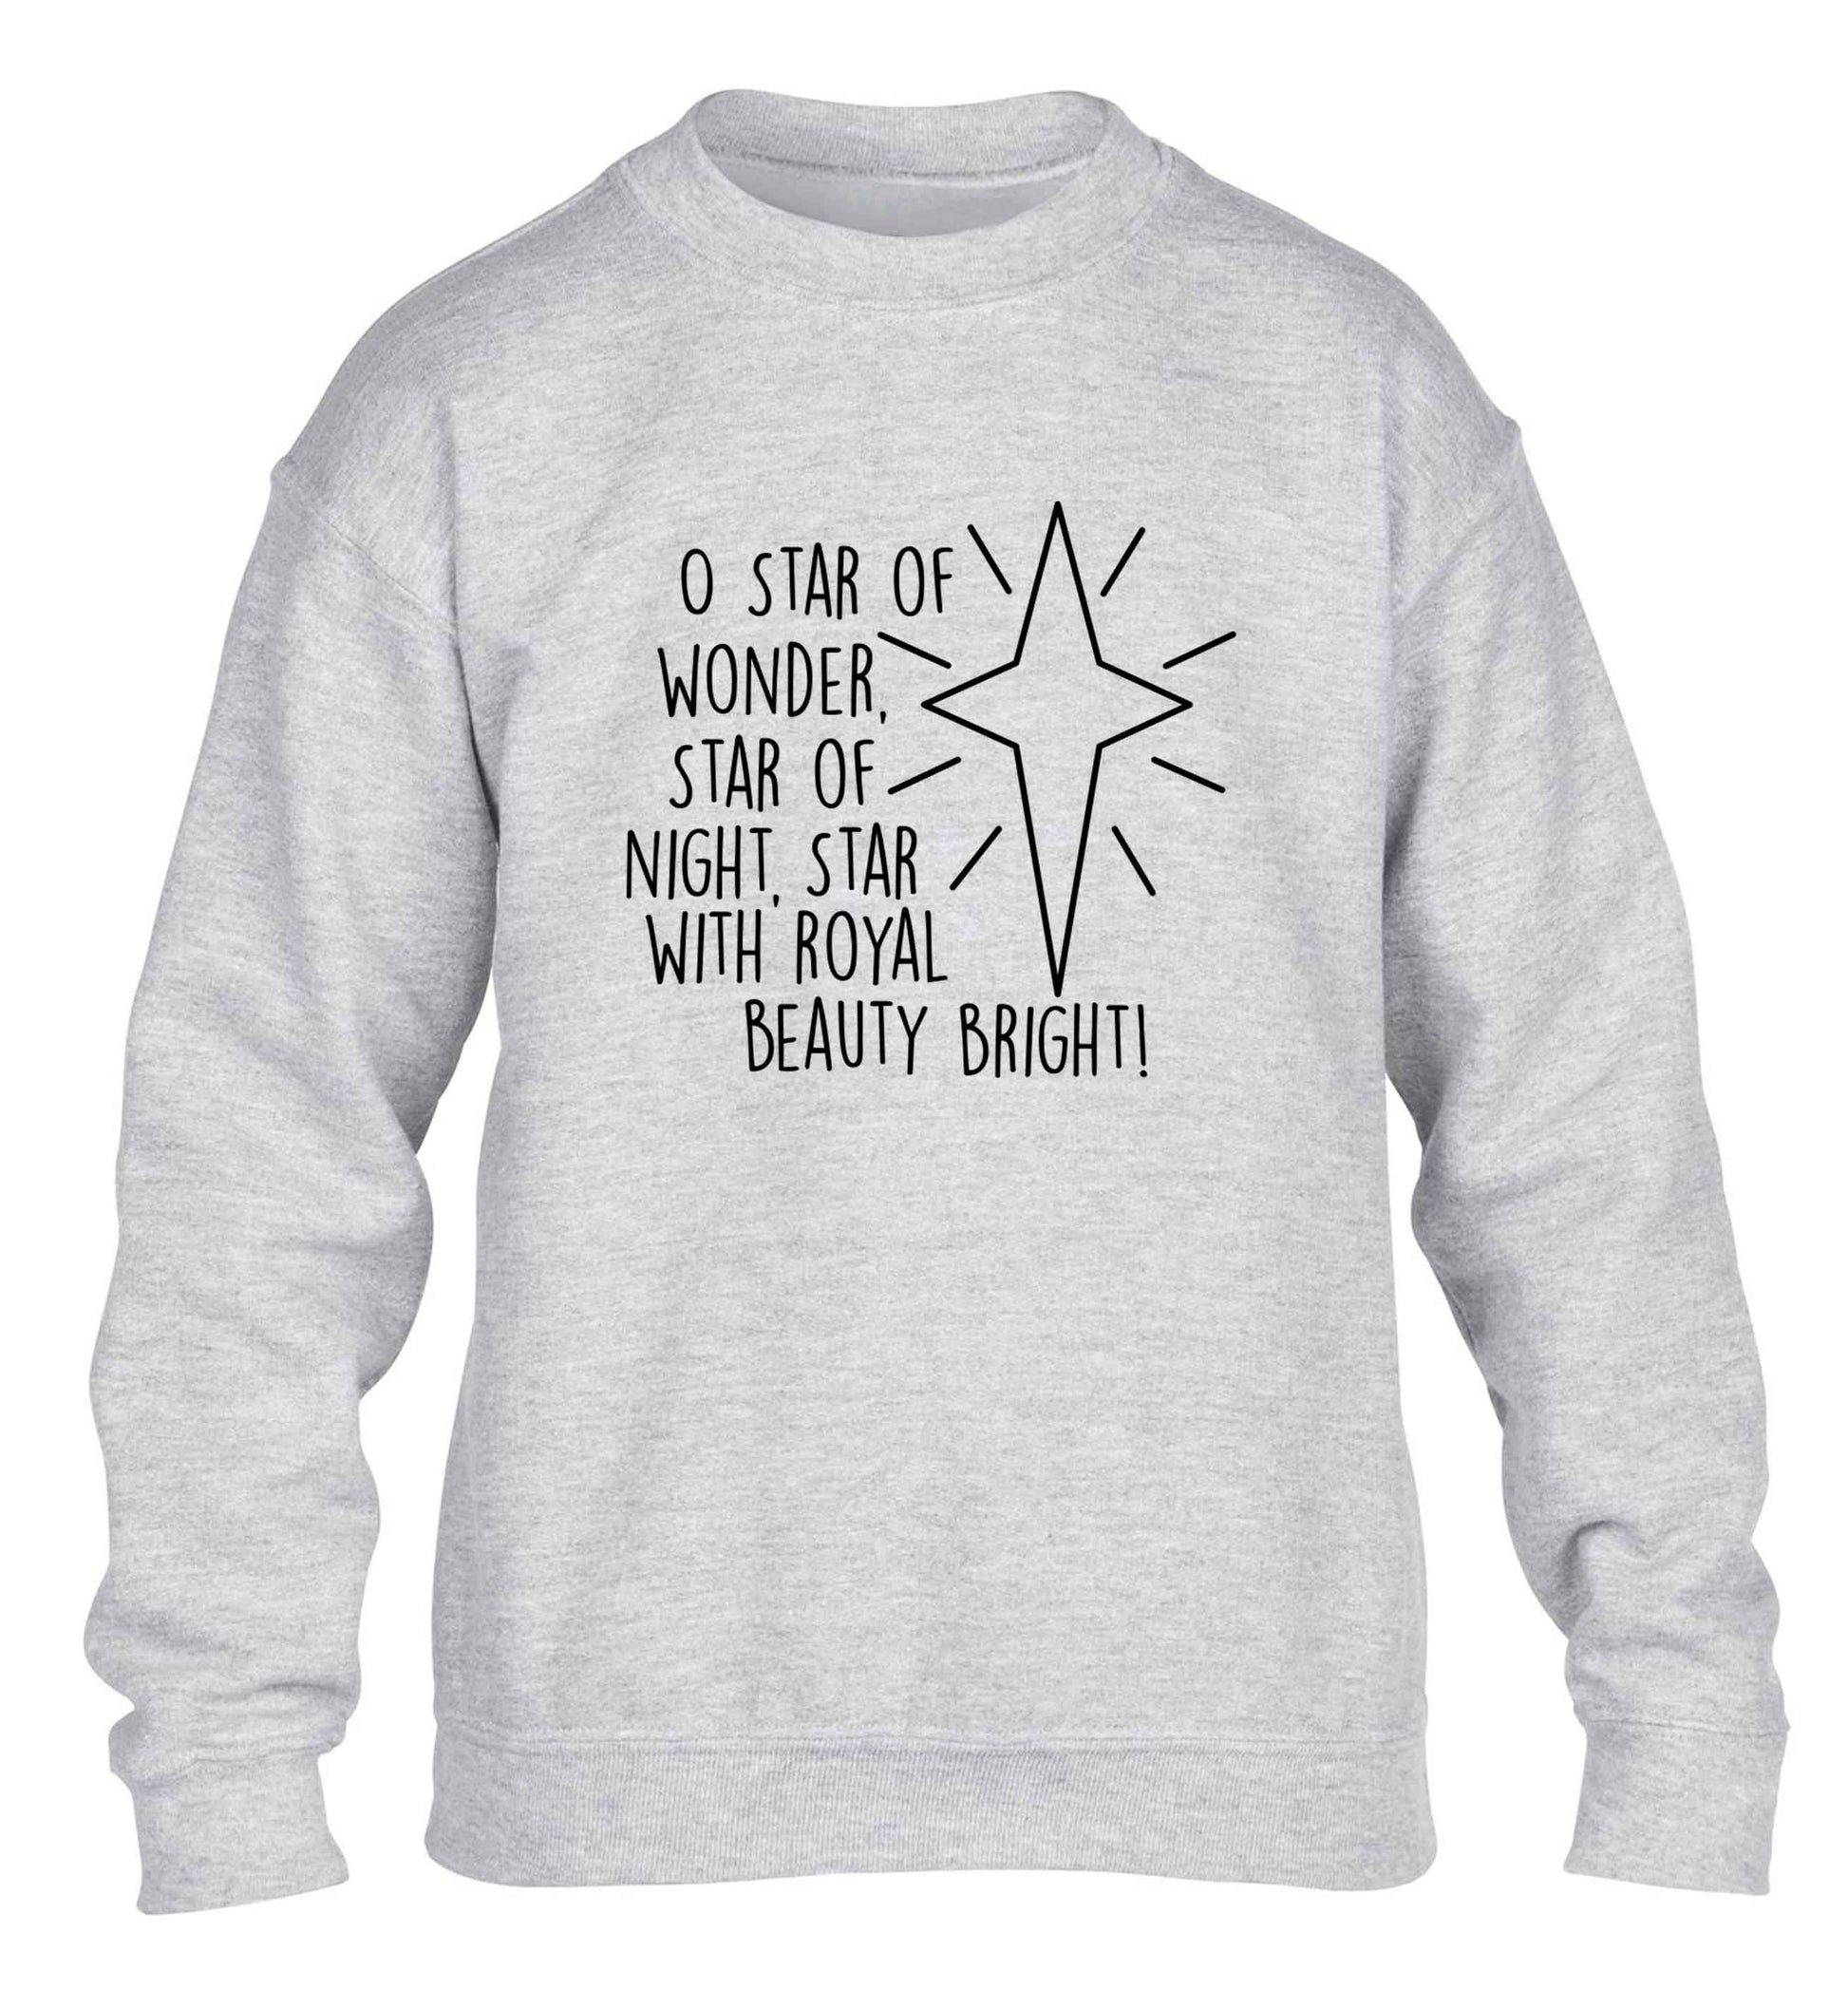 Oh star of wonder star of night, star with royal beauty bright children's grey sweater 12-13 Years